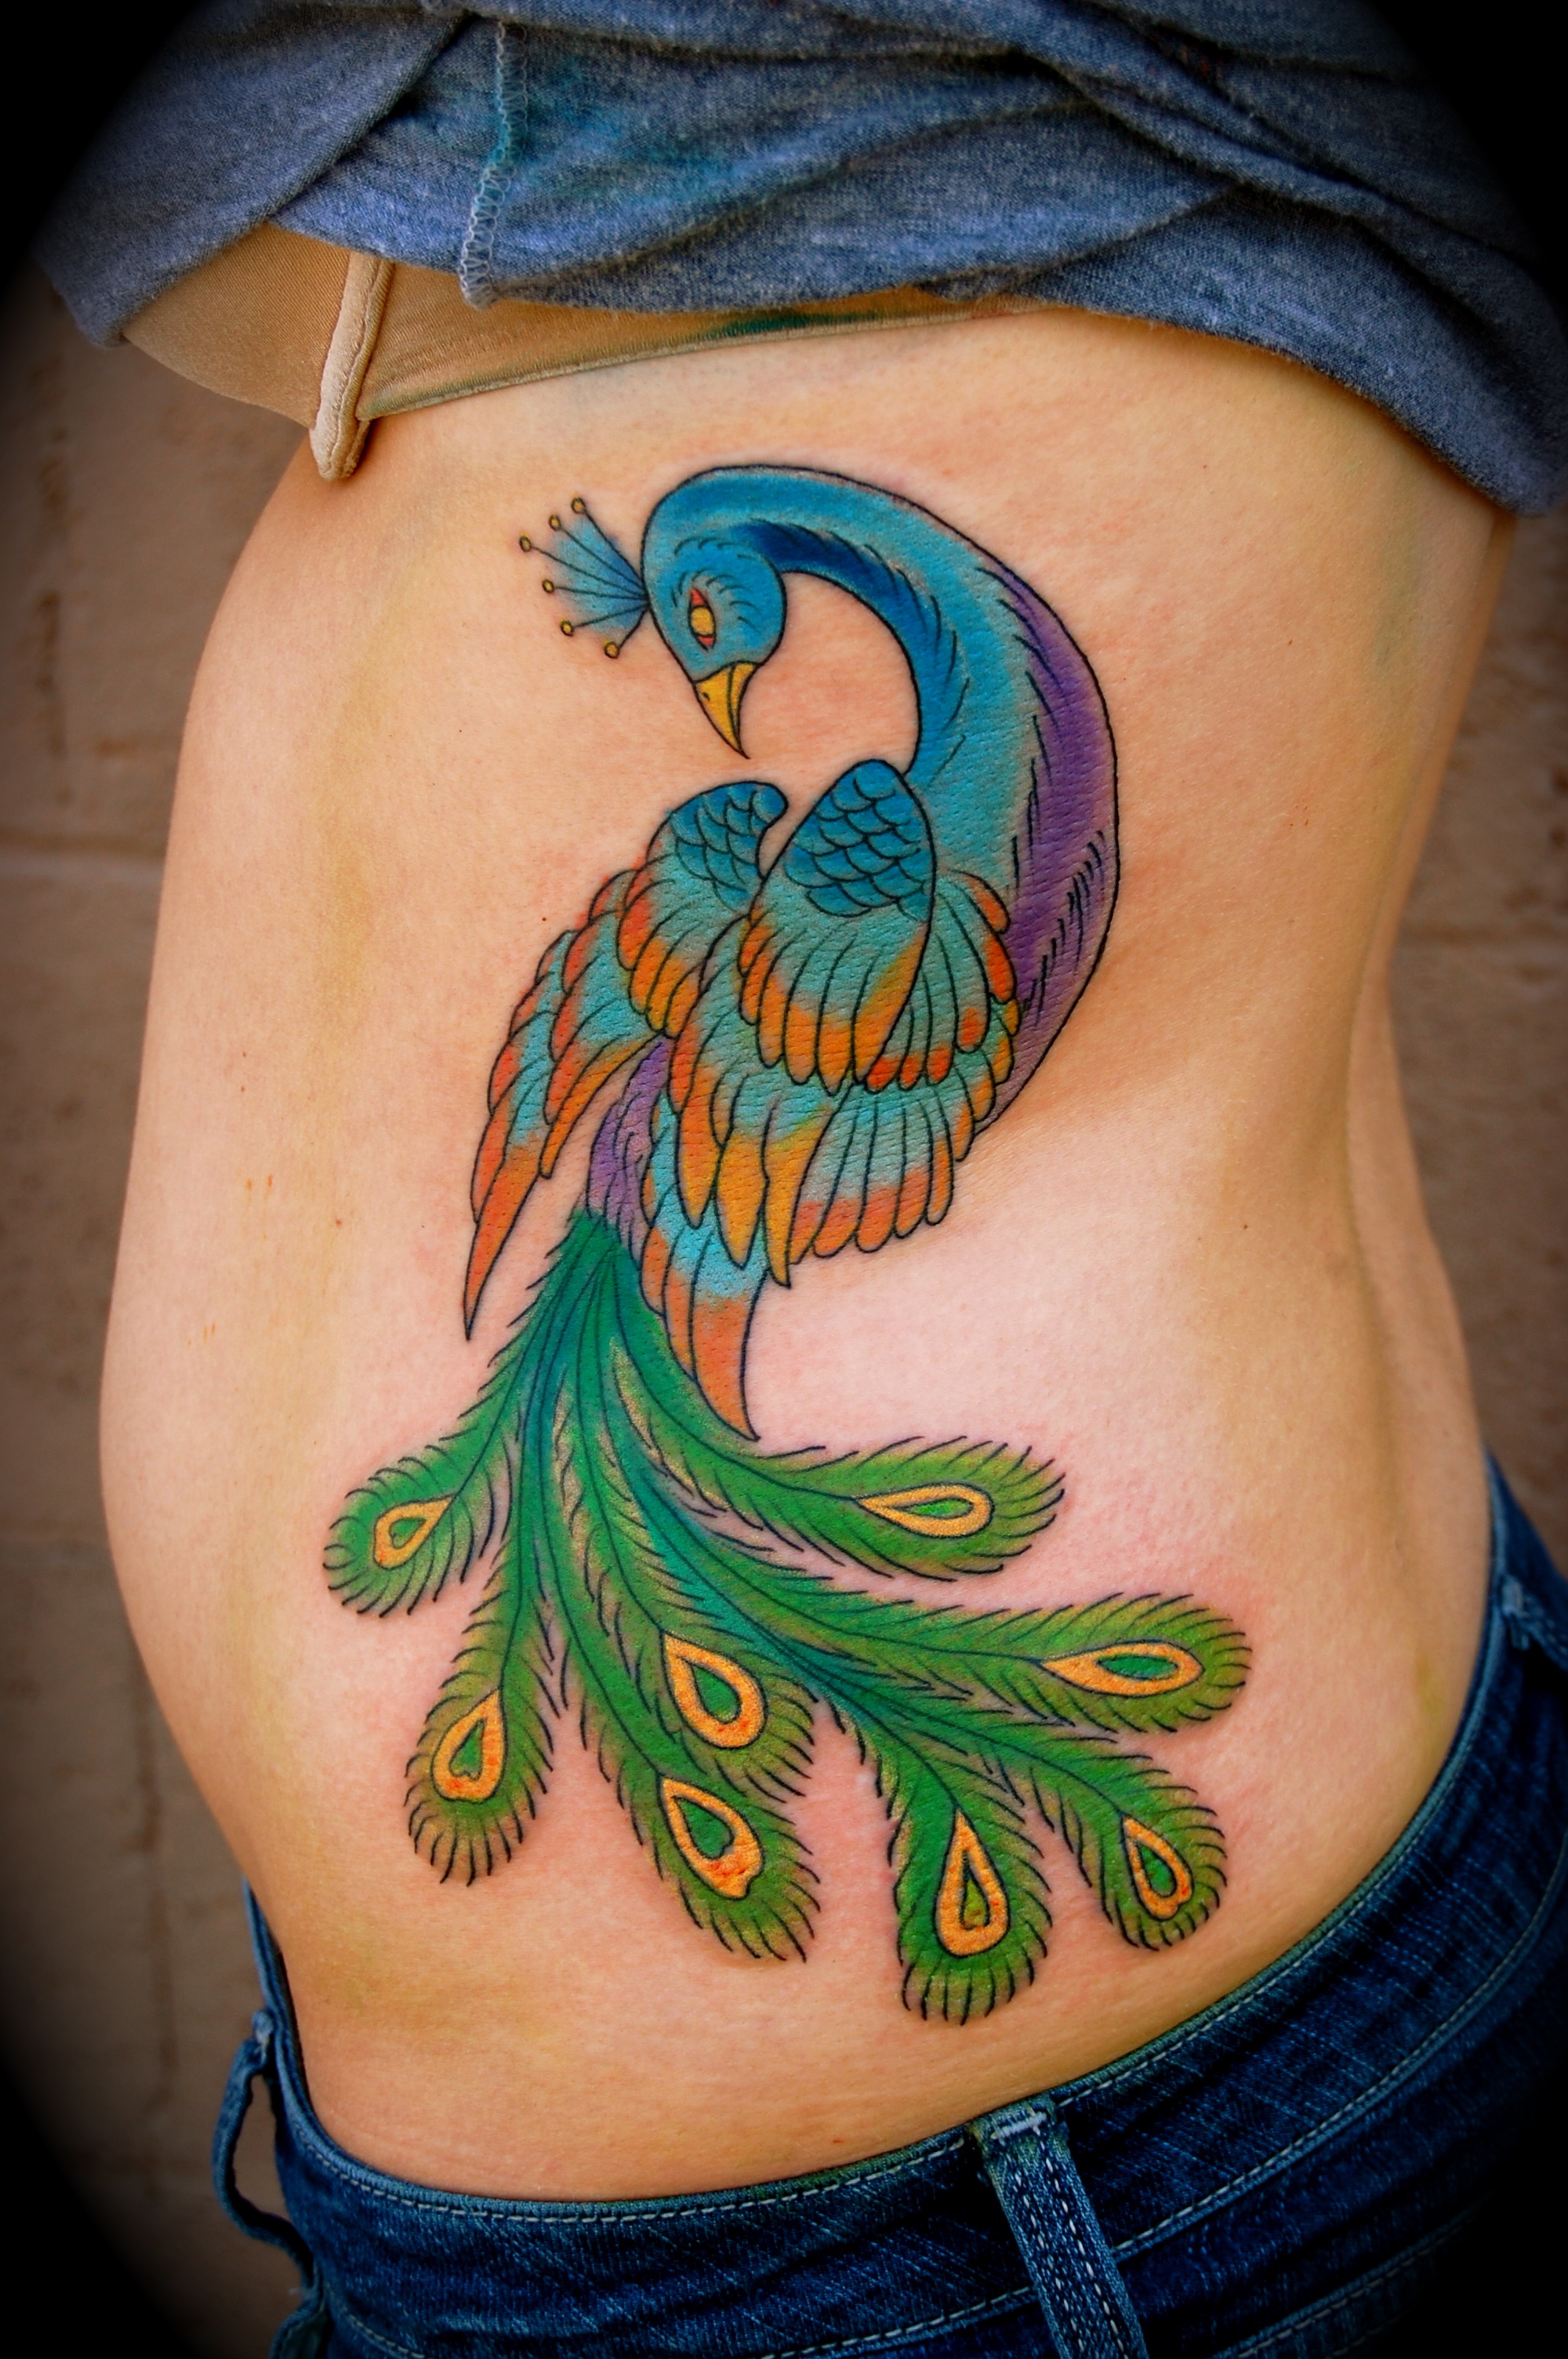 Peacock Tattoos Designs, Ideas and Meaning | Tattoos For You